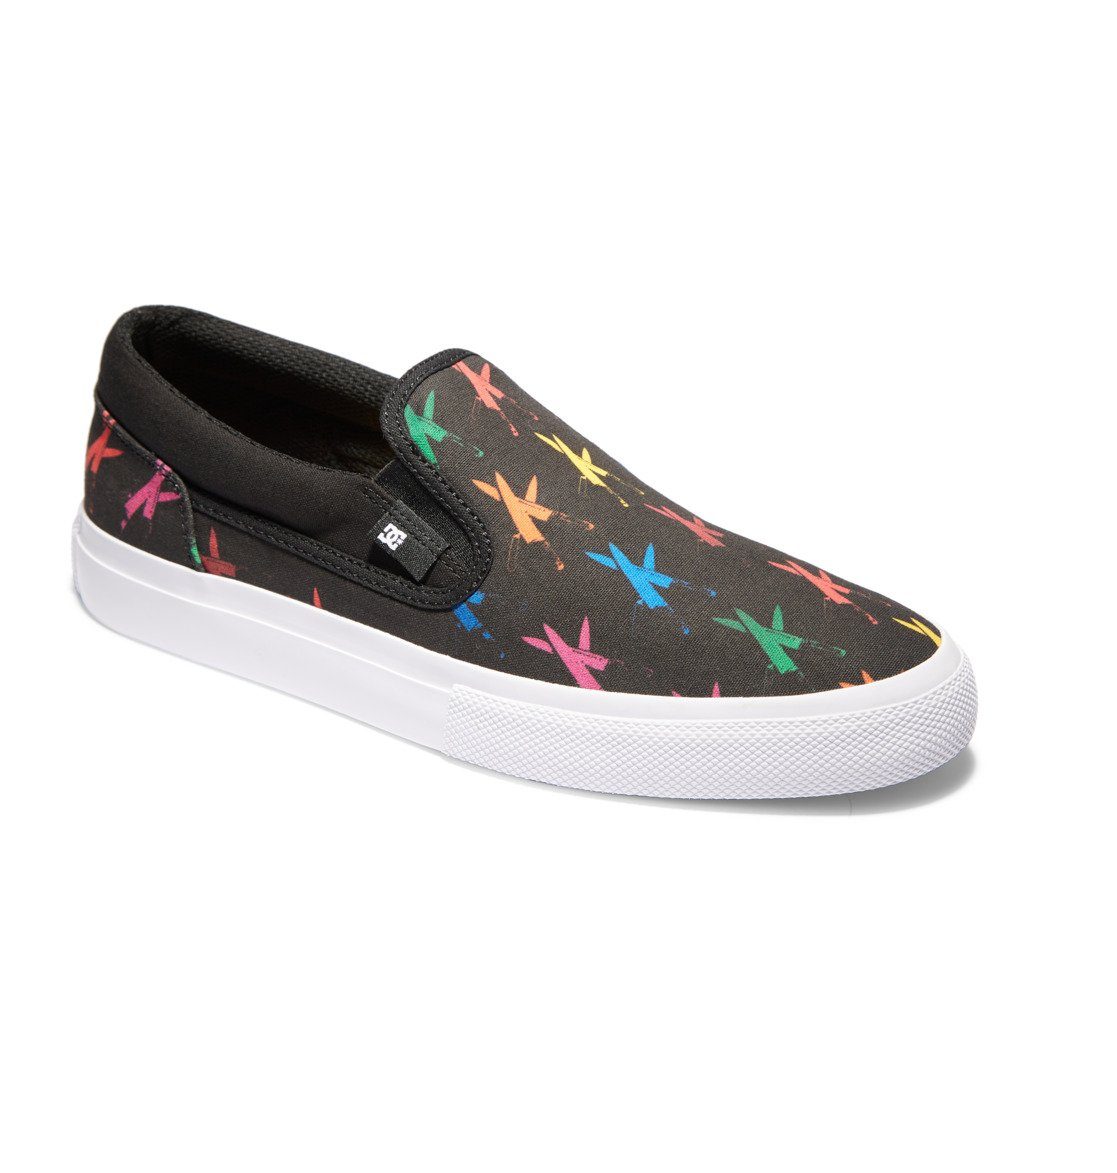 DC Shoes Sneakers Andy Warhol Manual Slip-On